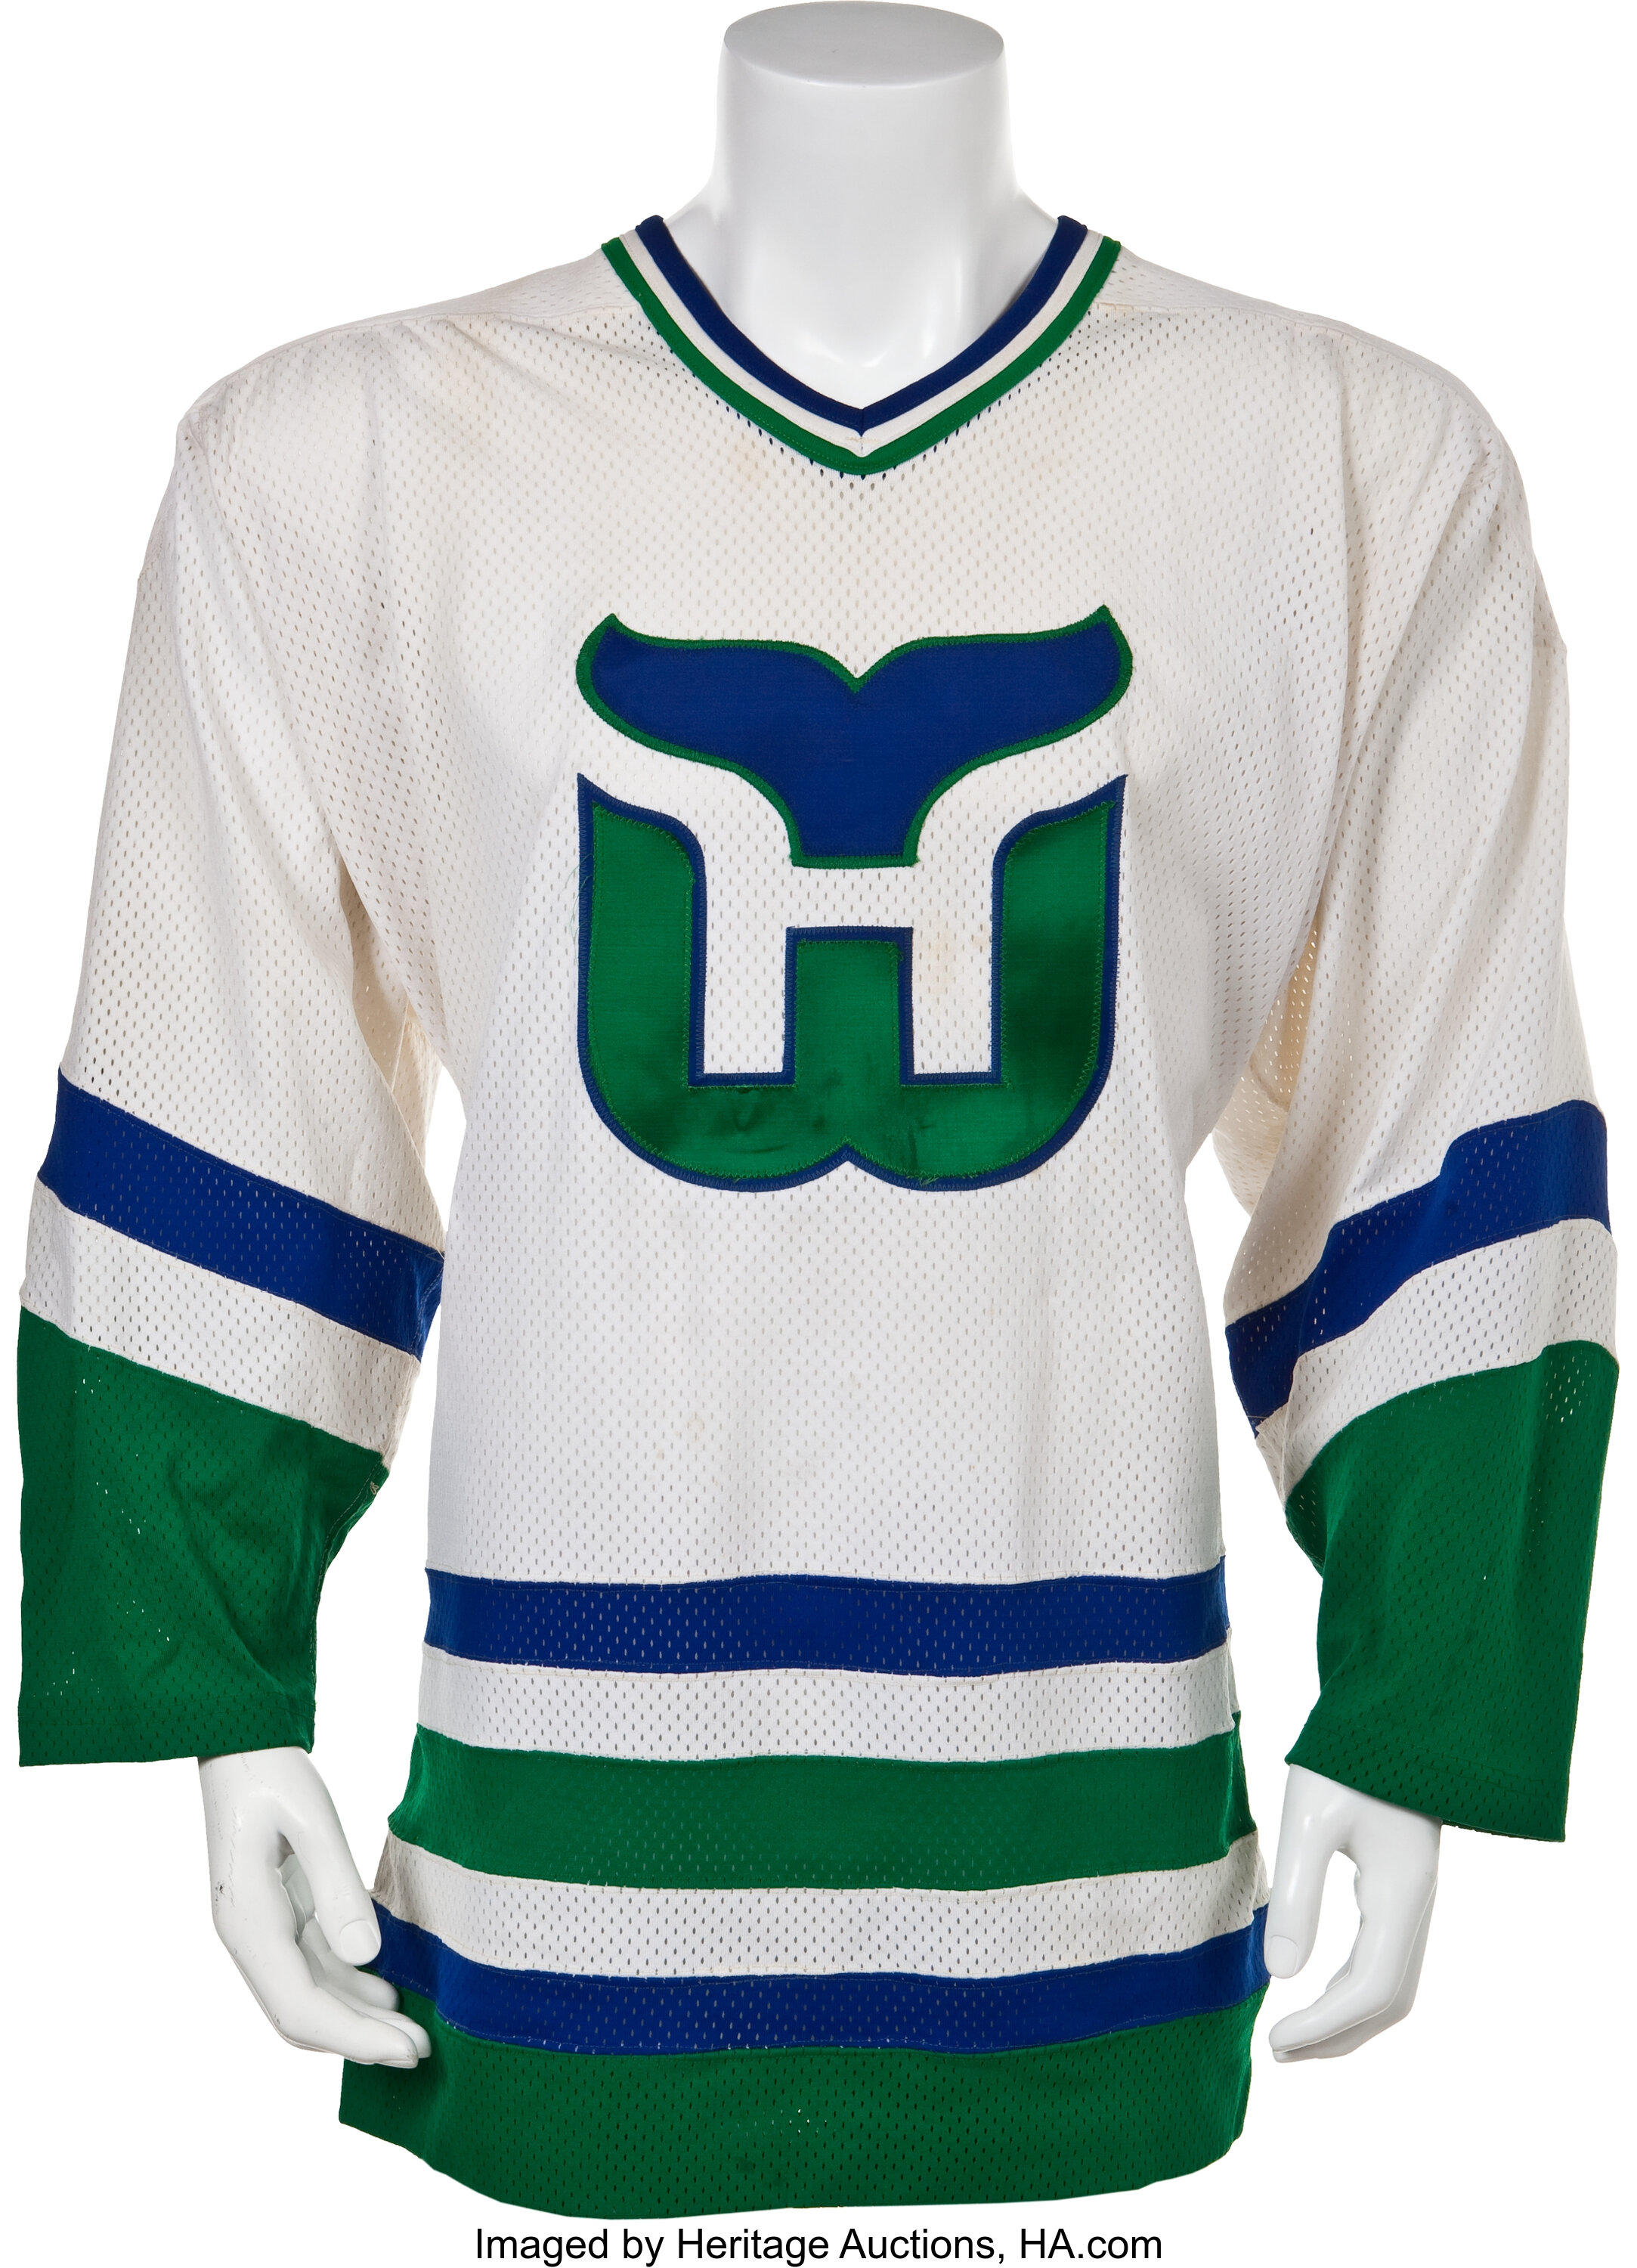 Remember the Whalers —